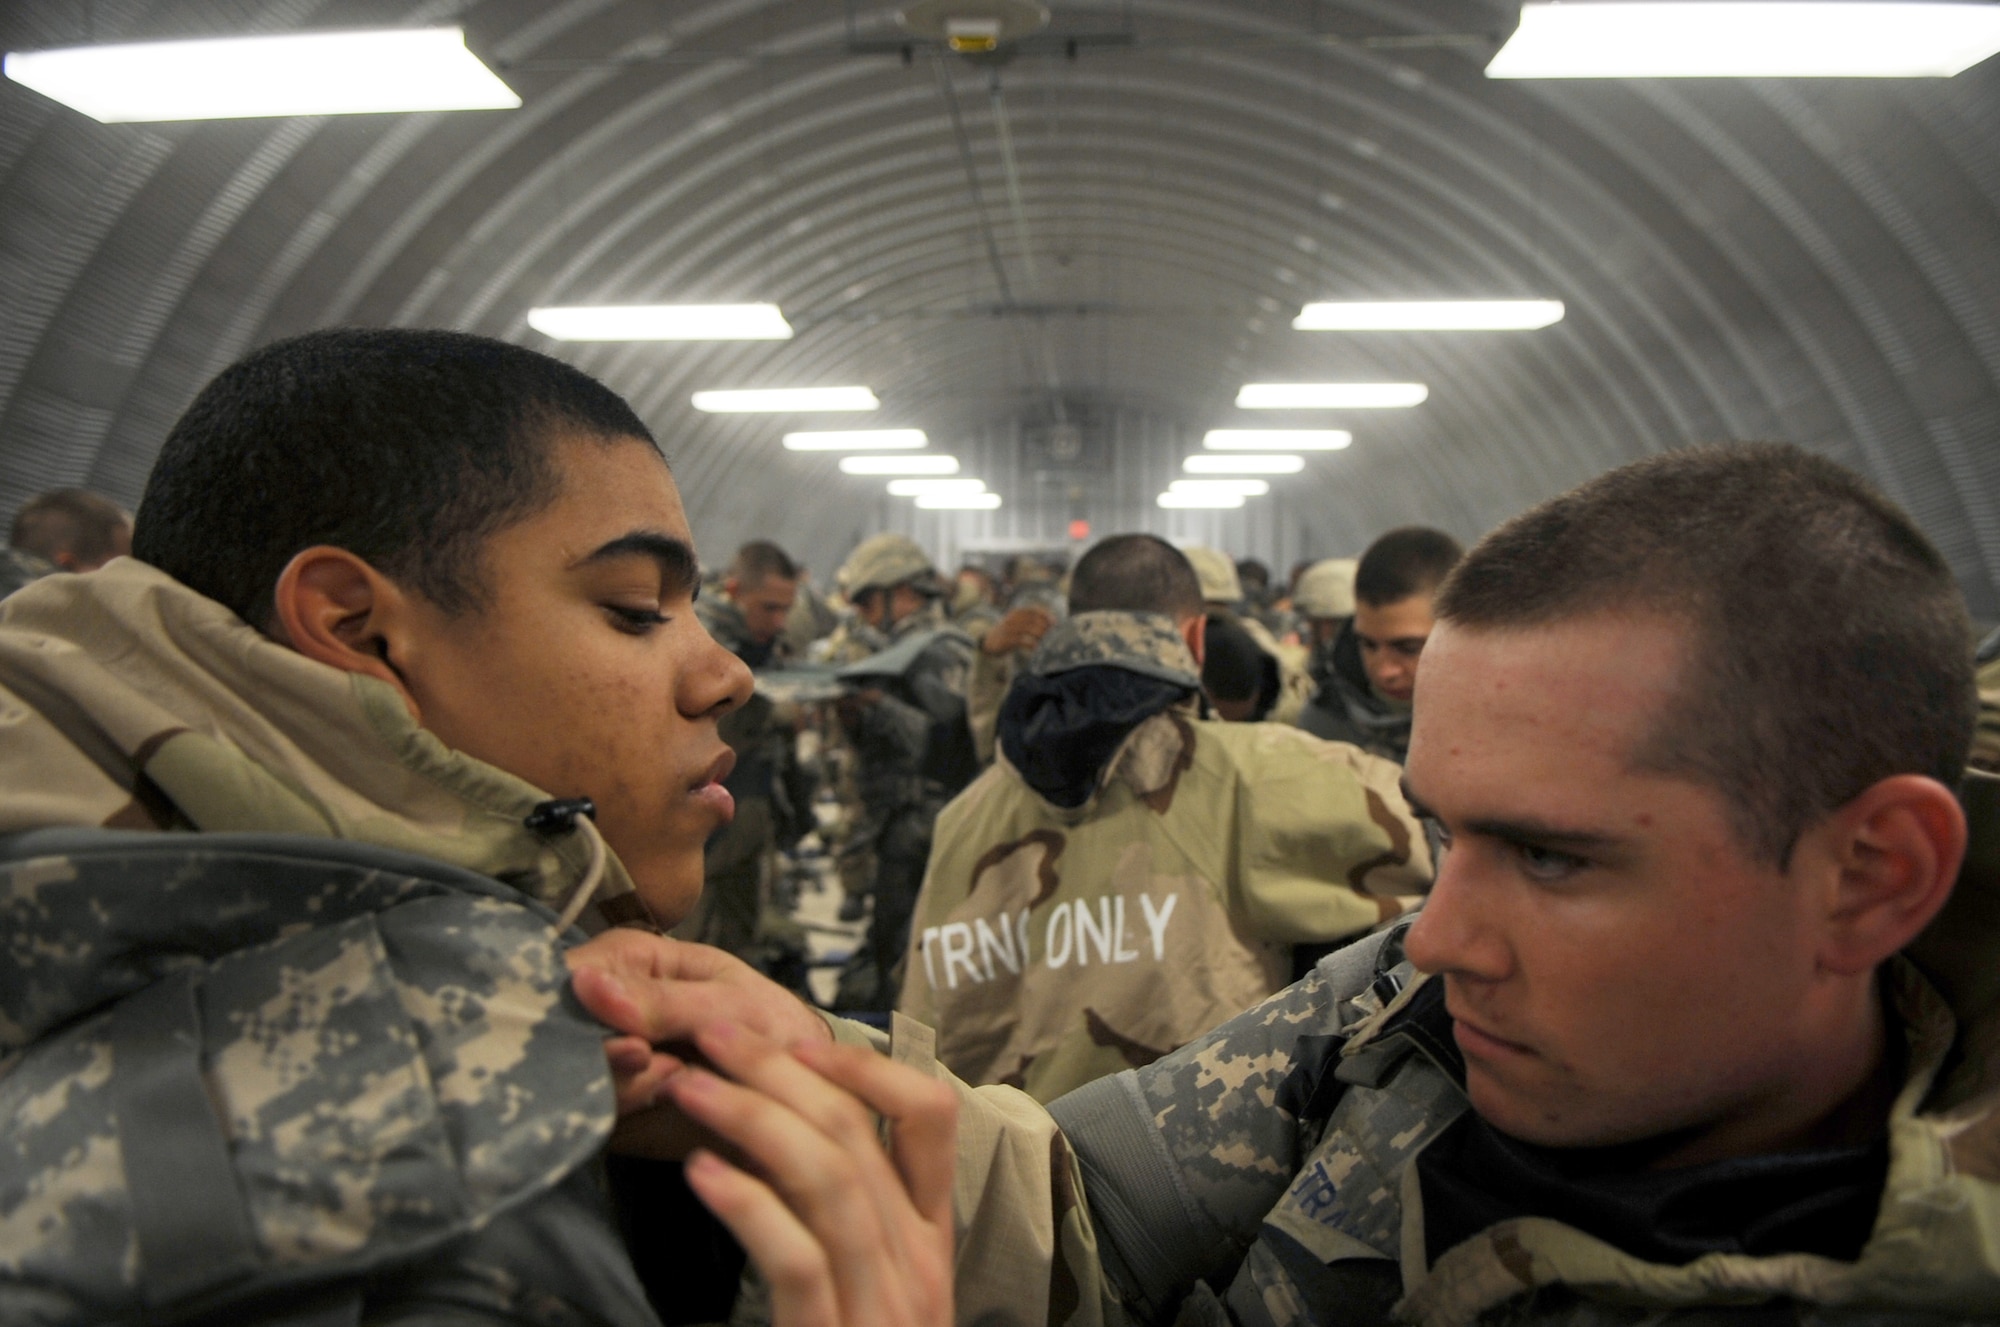 Airmen Basic trainees inspect each others body armor during the five-day deployment exercise called the Basic Expeditionary Airman Skills and Training, or BEAST, which kicked off Dec. 15 at Lackland Air Force Base, Texas. The BEAST is the newly built complex added into the extended, 8.5-week Basic Military Training curriculum that began Nov. 5. (U.S. Air Force photo/Staff Sgt. Desiree N. Palacios) 